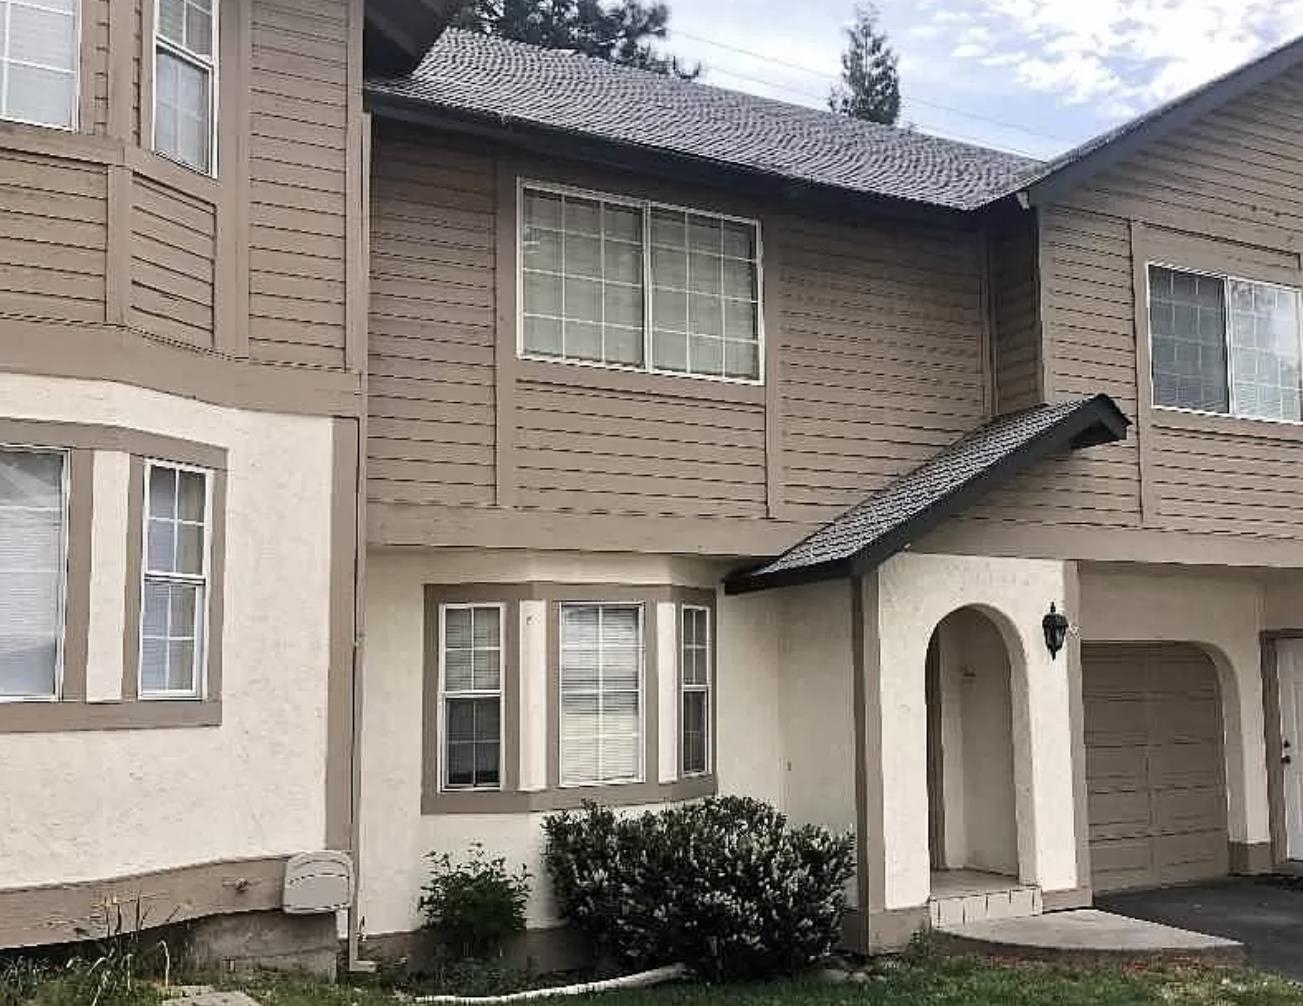 Beautiful Townhouse located within walking distance of downtown, schools, restaurants, bars, and coffee shops. Only a few miles from hikes, lakes, and many other outdoor activities. This 2 bedroom 1.5 bath features brand new flooring throughout the entire unit, as well as a top to bottom remodel of the restroom. This unit has been updated and remodeled to have a clean and sleek look. This property's HOA covers the cost of exterior yard maintenance, paint and siding maintenance, roofing repair, trash, and even snow removal! There is laundry in unit with a very quiet and friendly neighborhood. There is also a covered and enclosed carport detached from the unit as well.